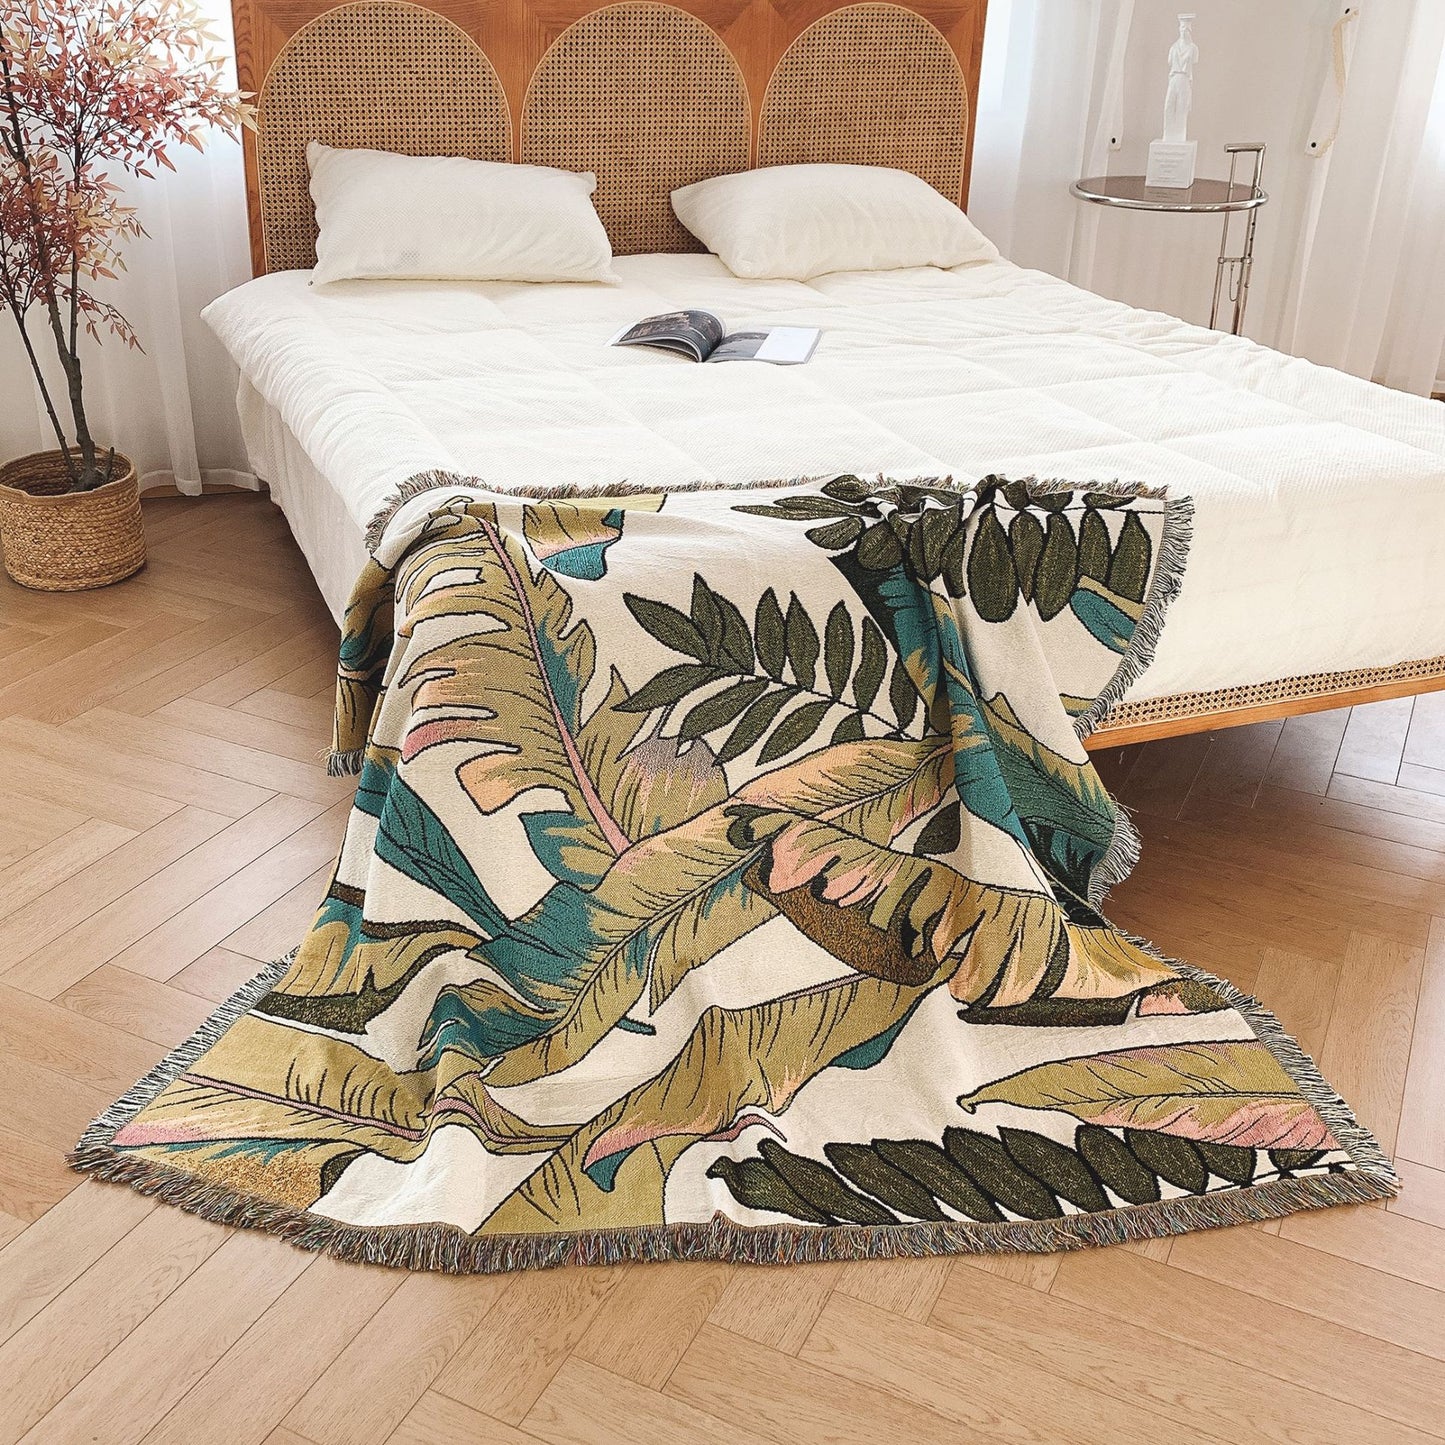 Palm Leaves Tapestry Woven Throw Blanket Picnic Blanket Sofa Covers 130 x 160 CM